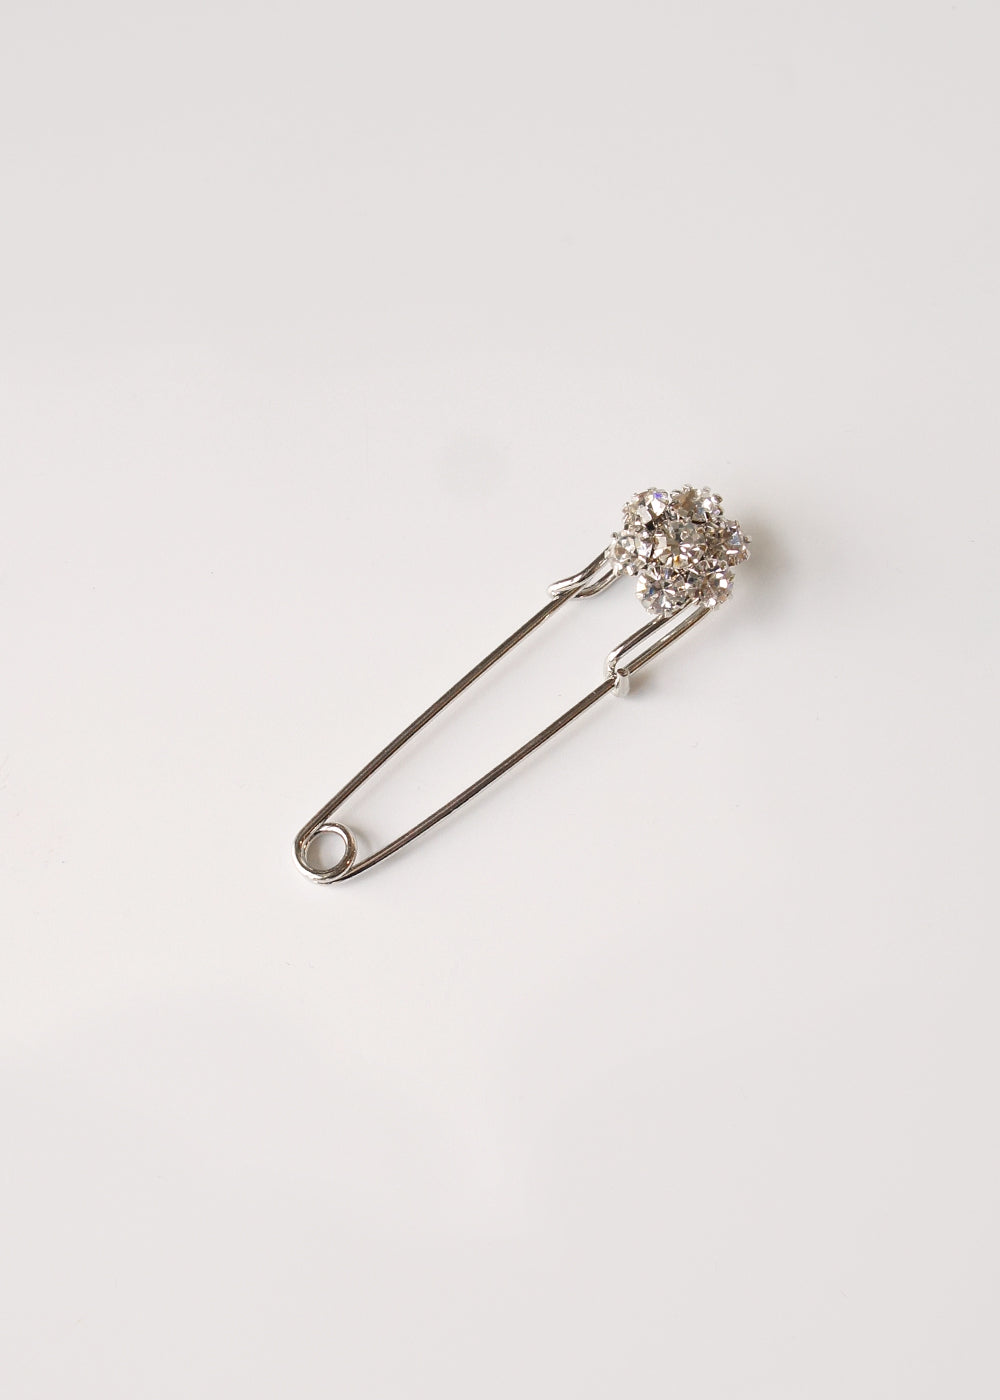 Women's Brooches & Pins, Flower & Crystal Brooches